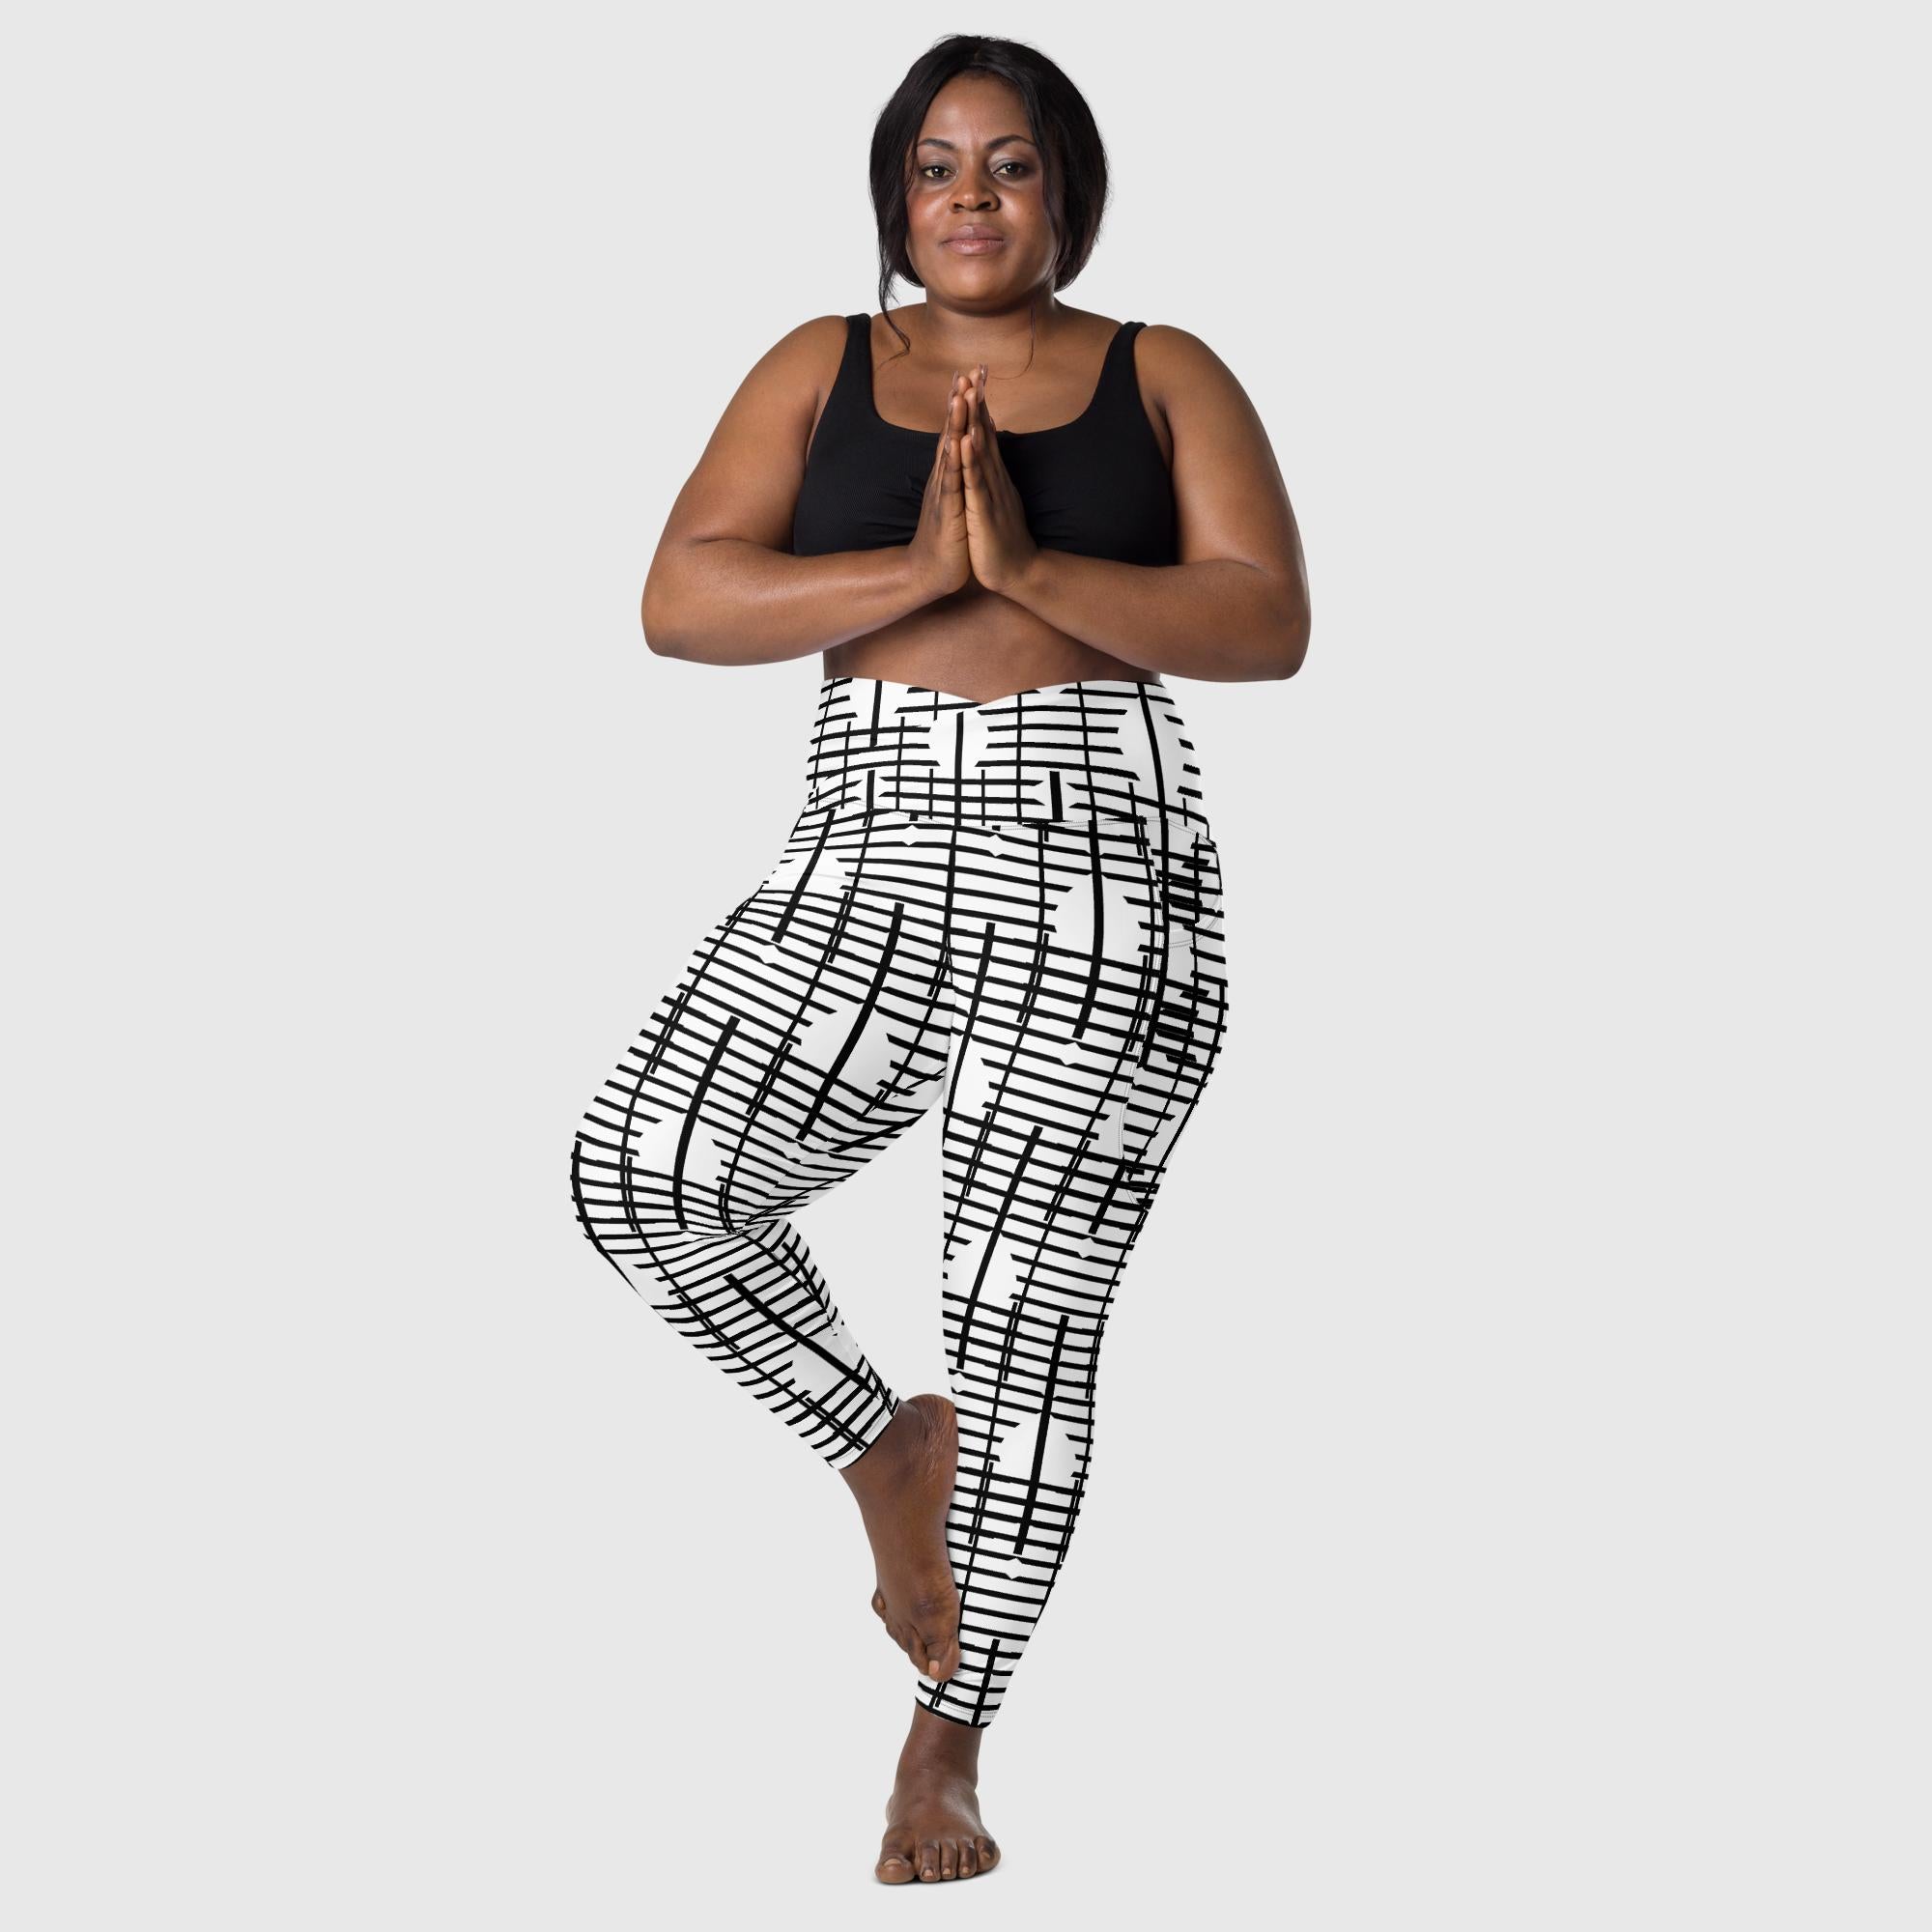 Black Recycled Crossover Leggings with Pockets - Revive Wear     Plus Size Black Recycled Leggings with Pockets. Comfortable plus size leggings with pockets made from recycled materials. Stylish women's activewear.  
